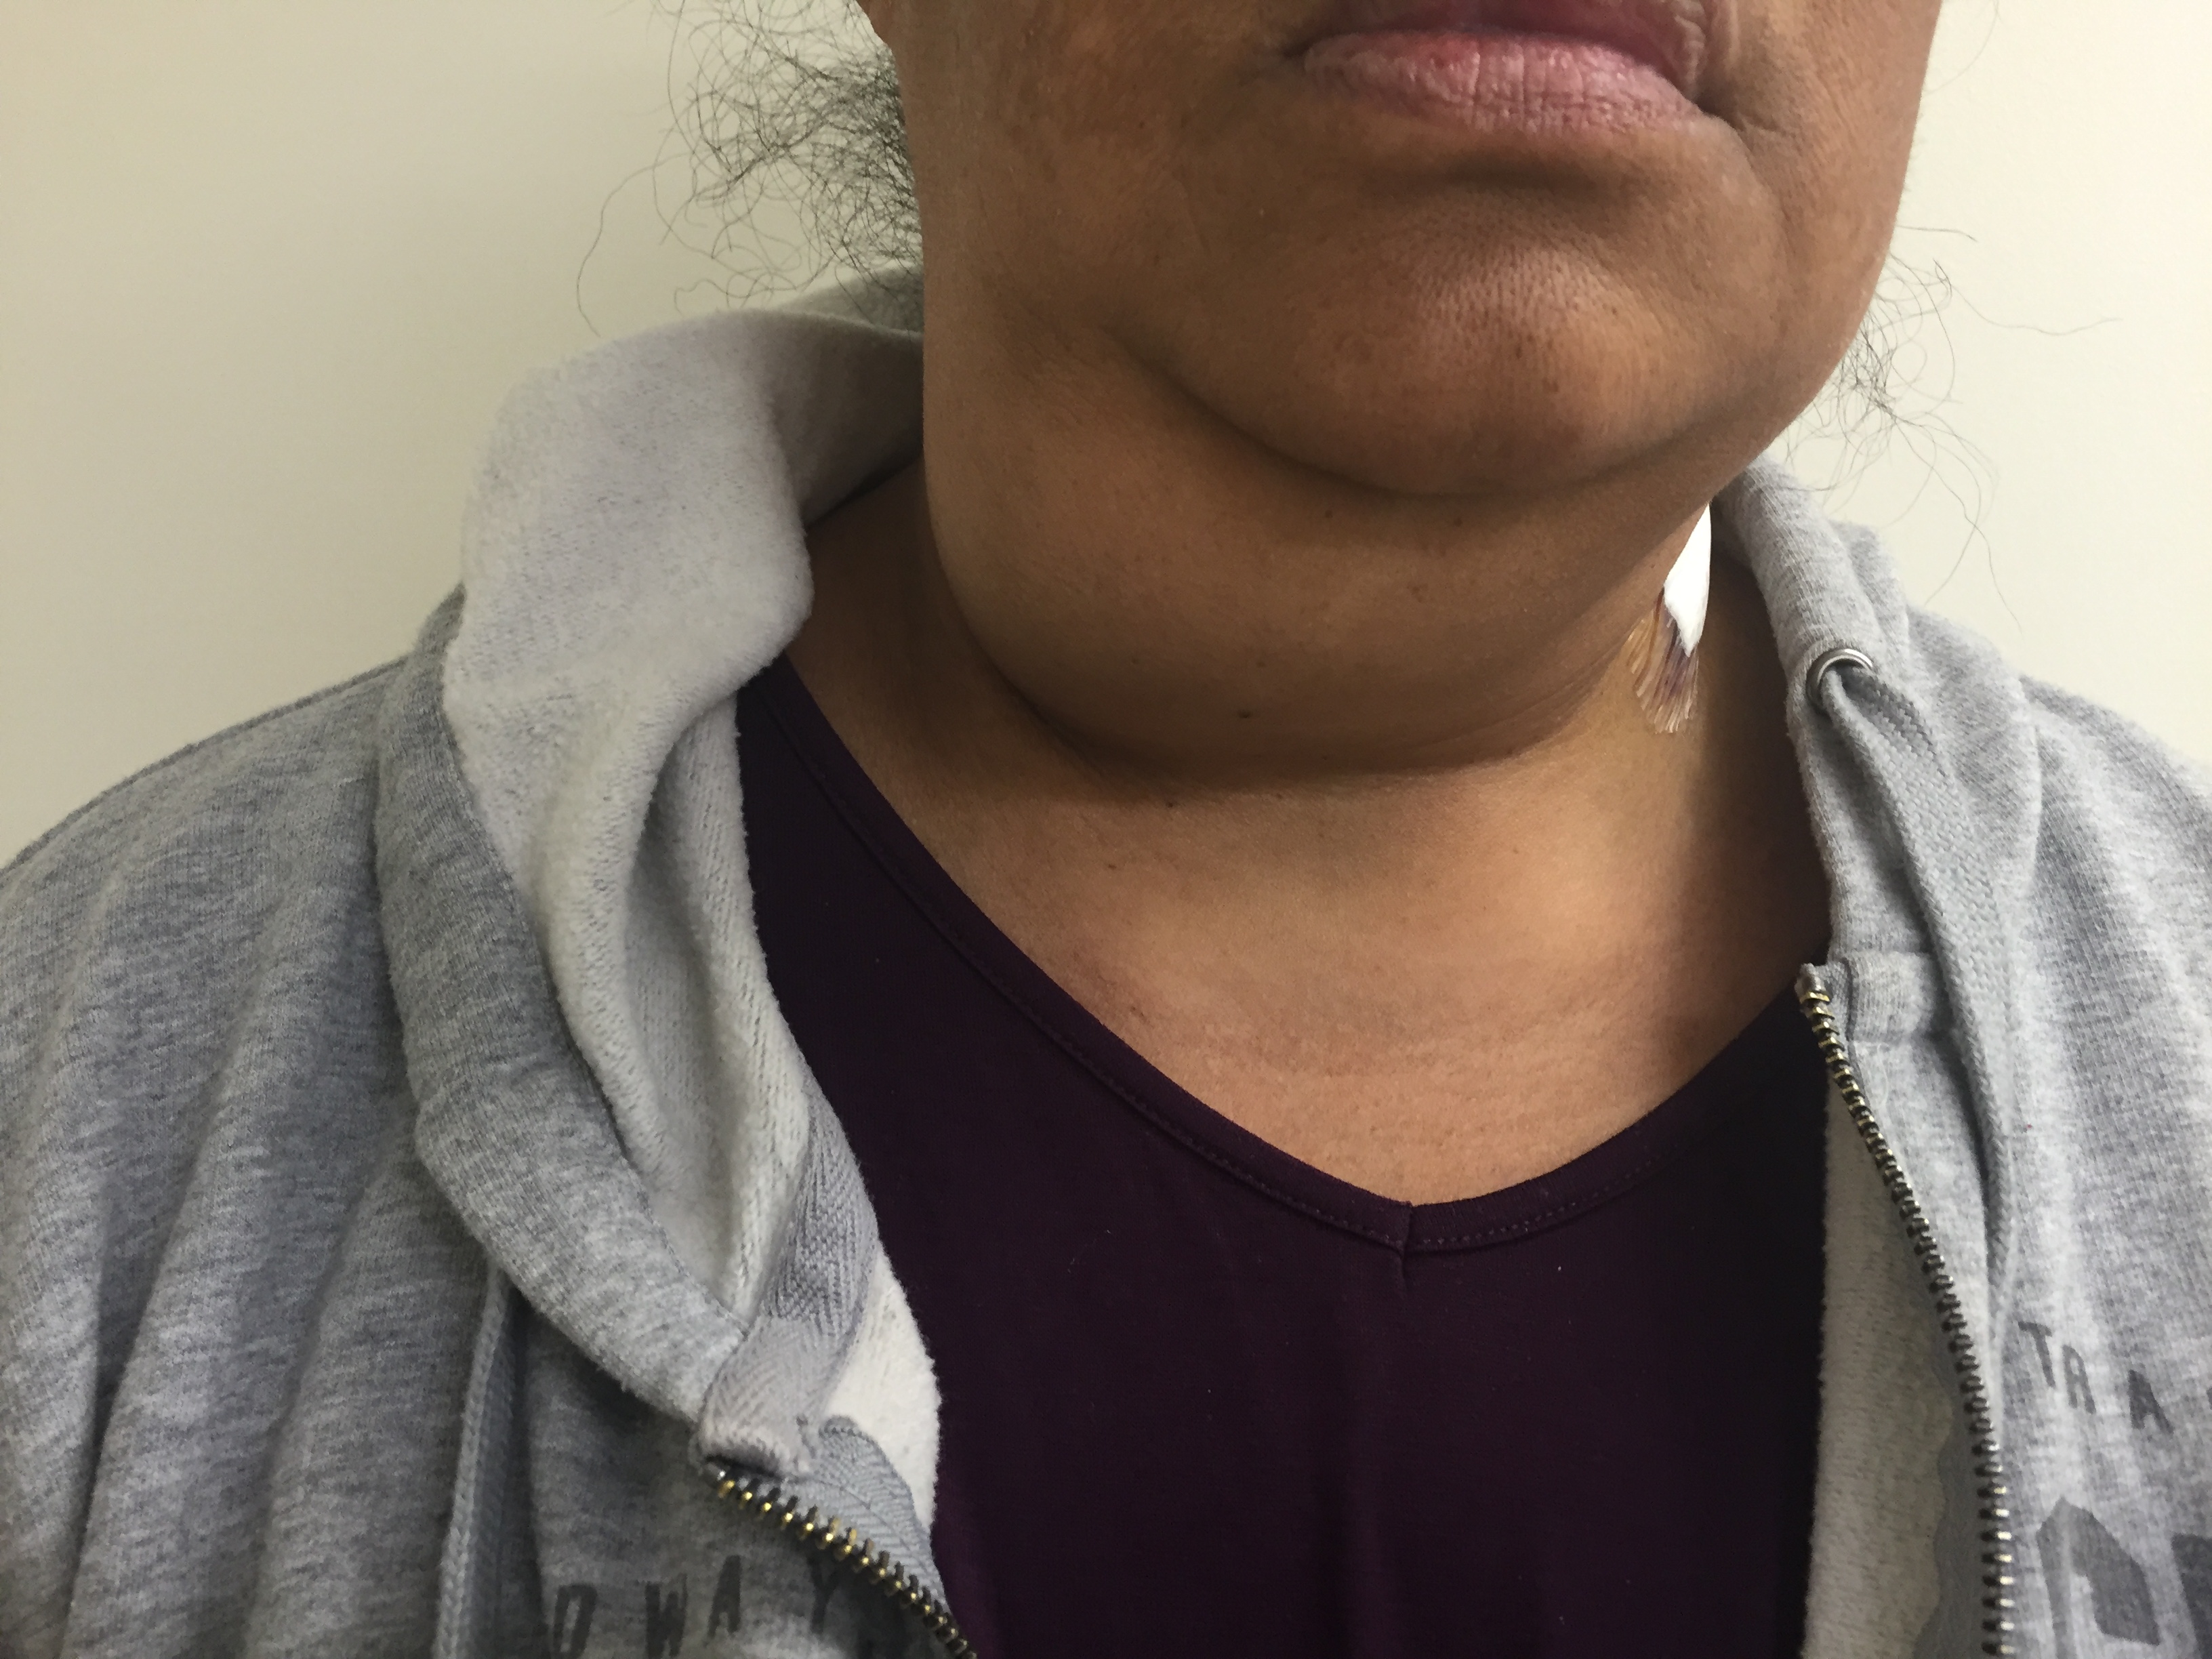 swelling in jaw and neck